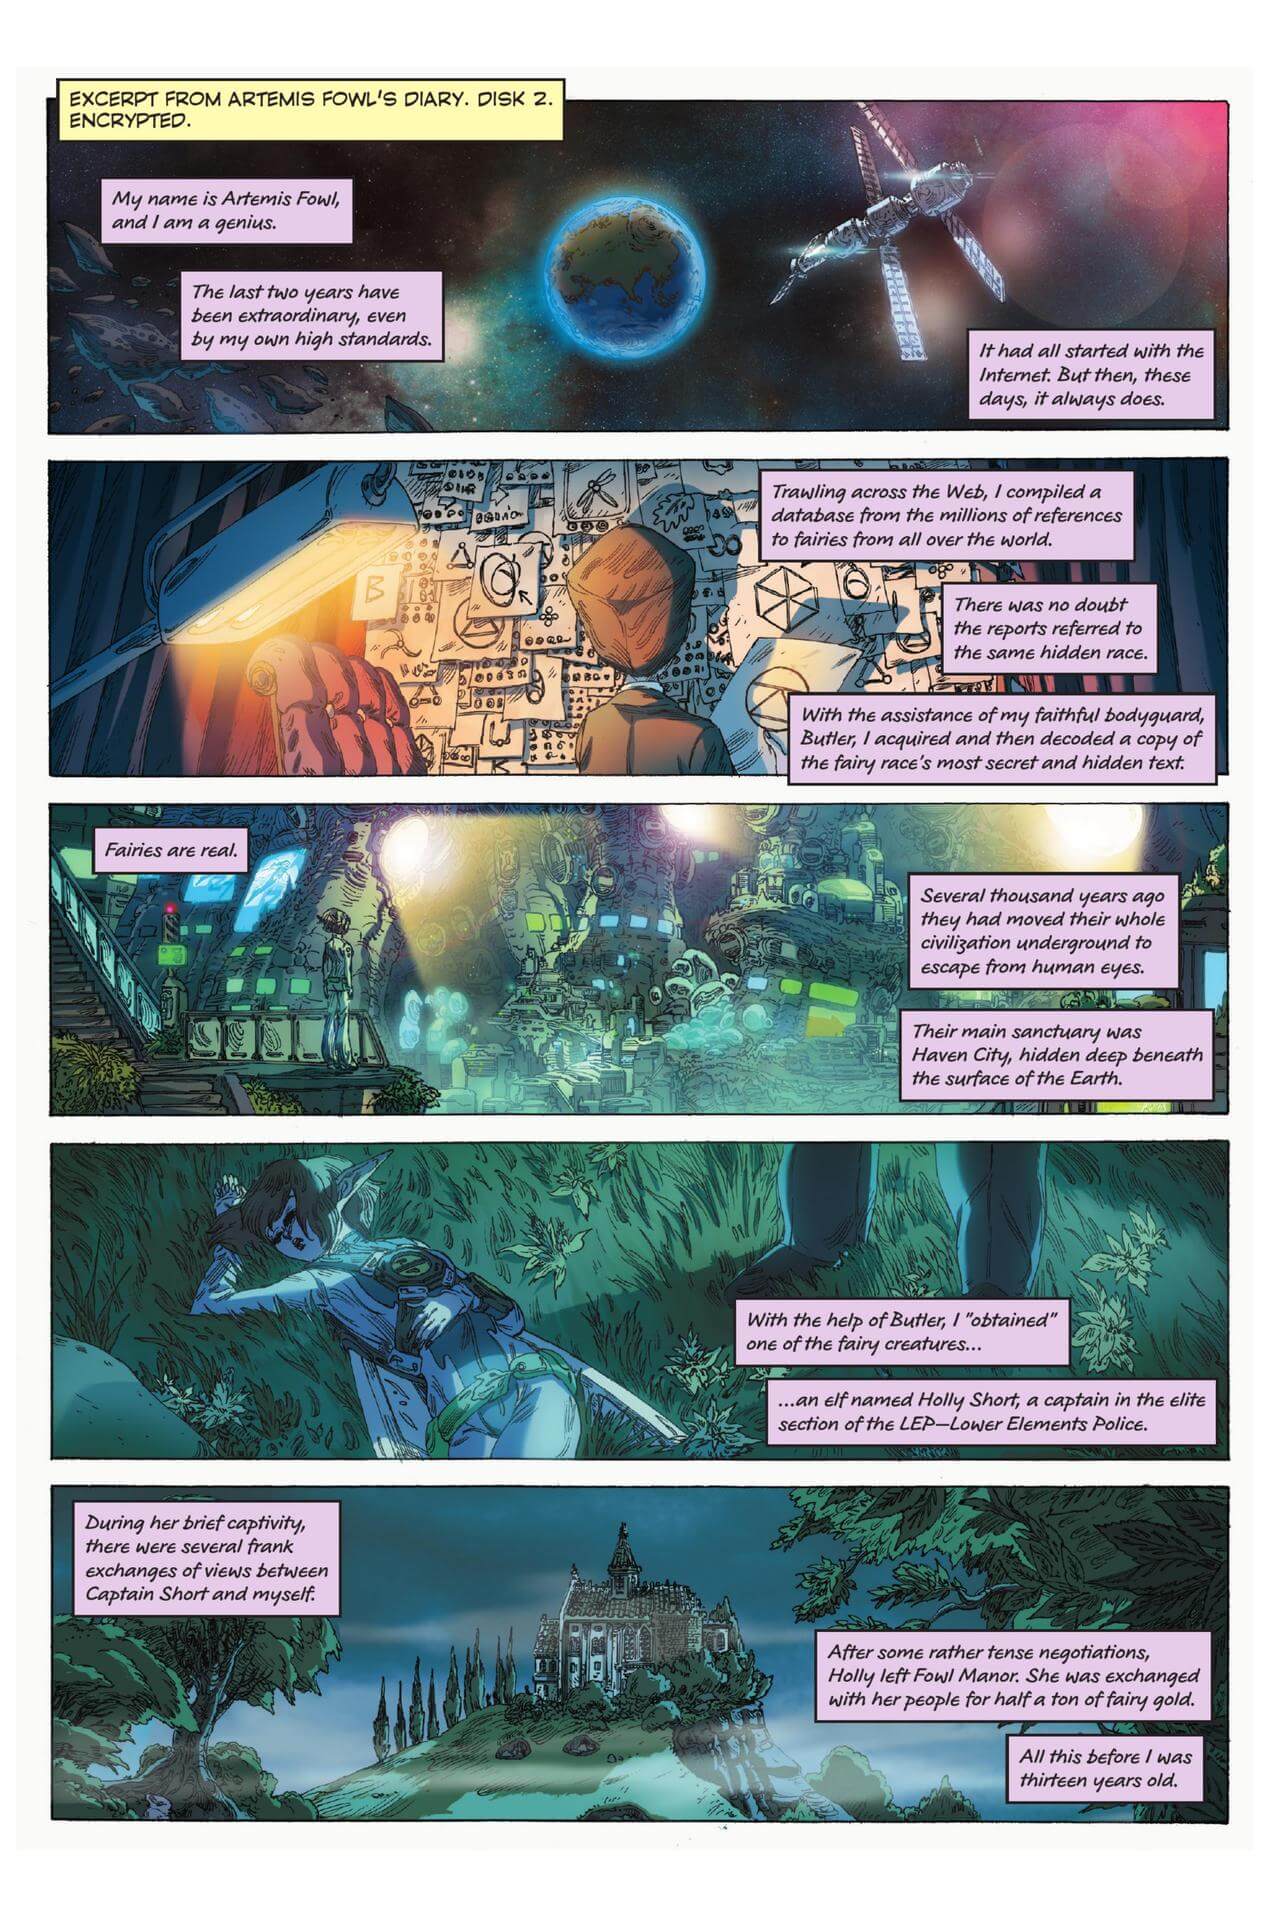 page 1 of artemis fowl eternity code graphic novel